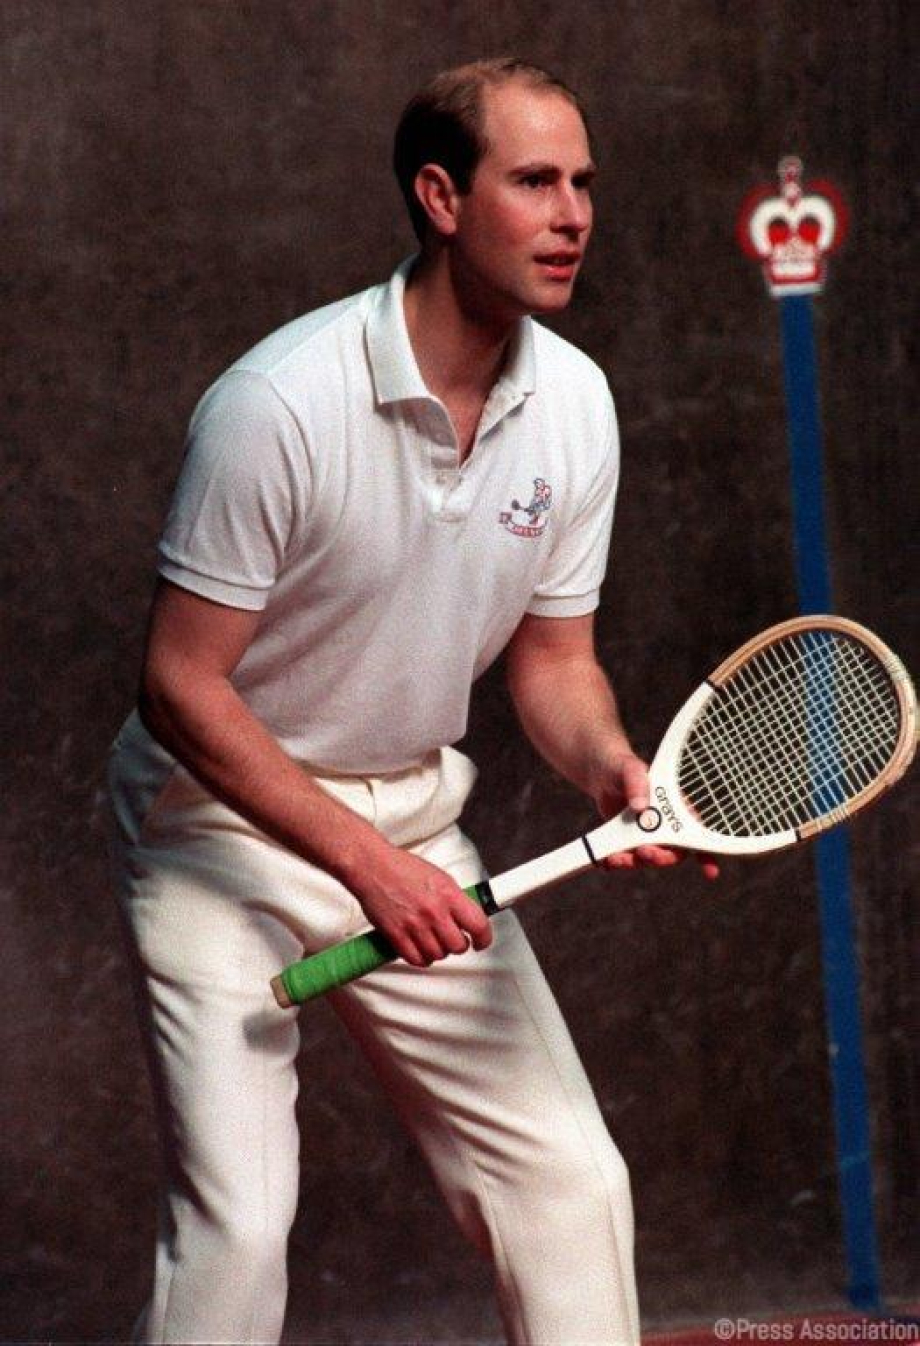 The Earl of Wessex playing Tennis in 1993